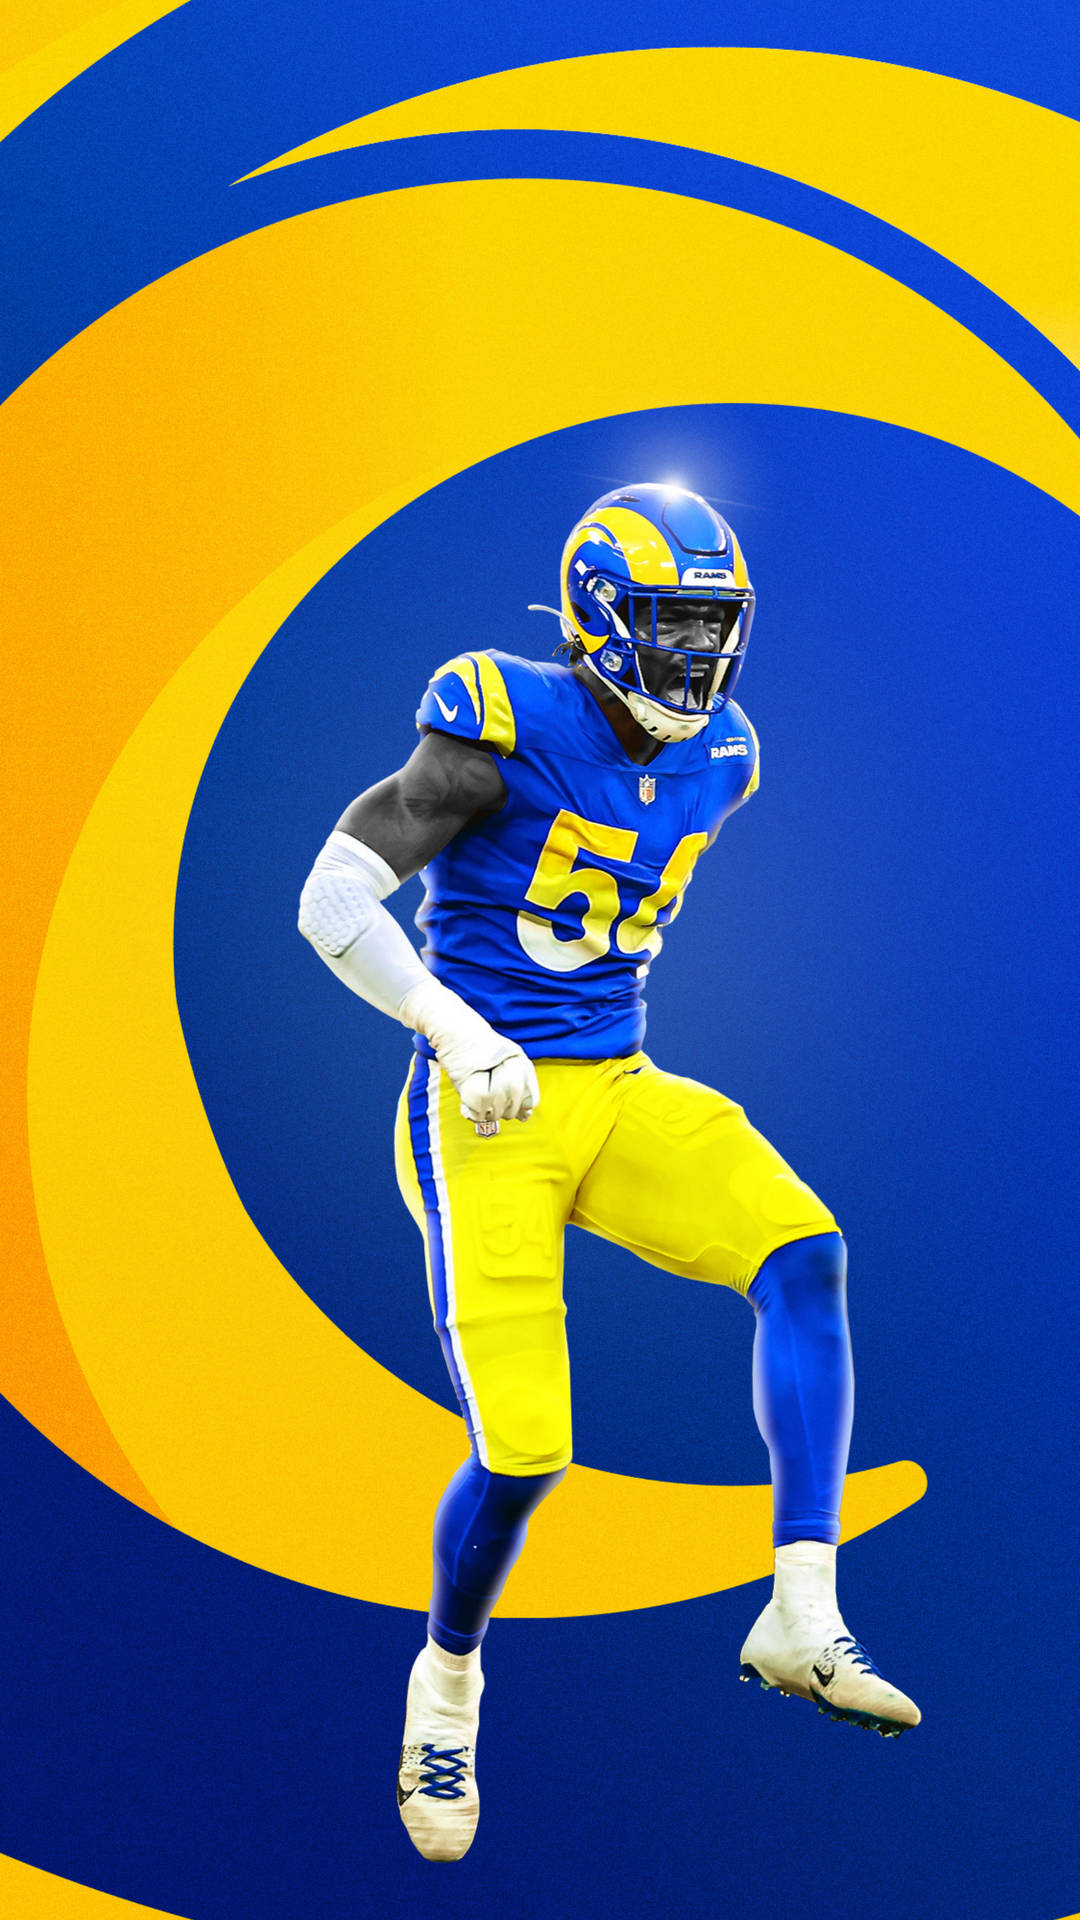 Los Angeles Rams 54 Background